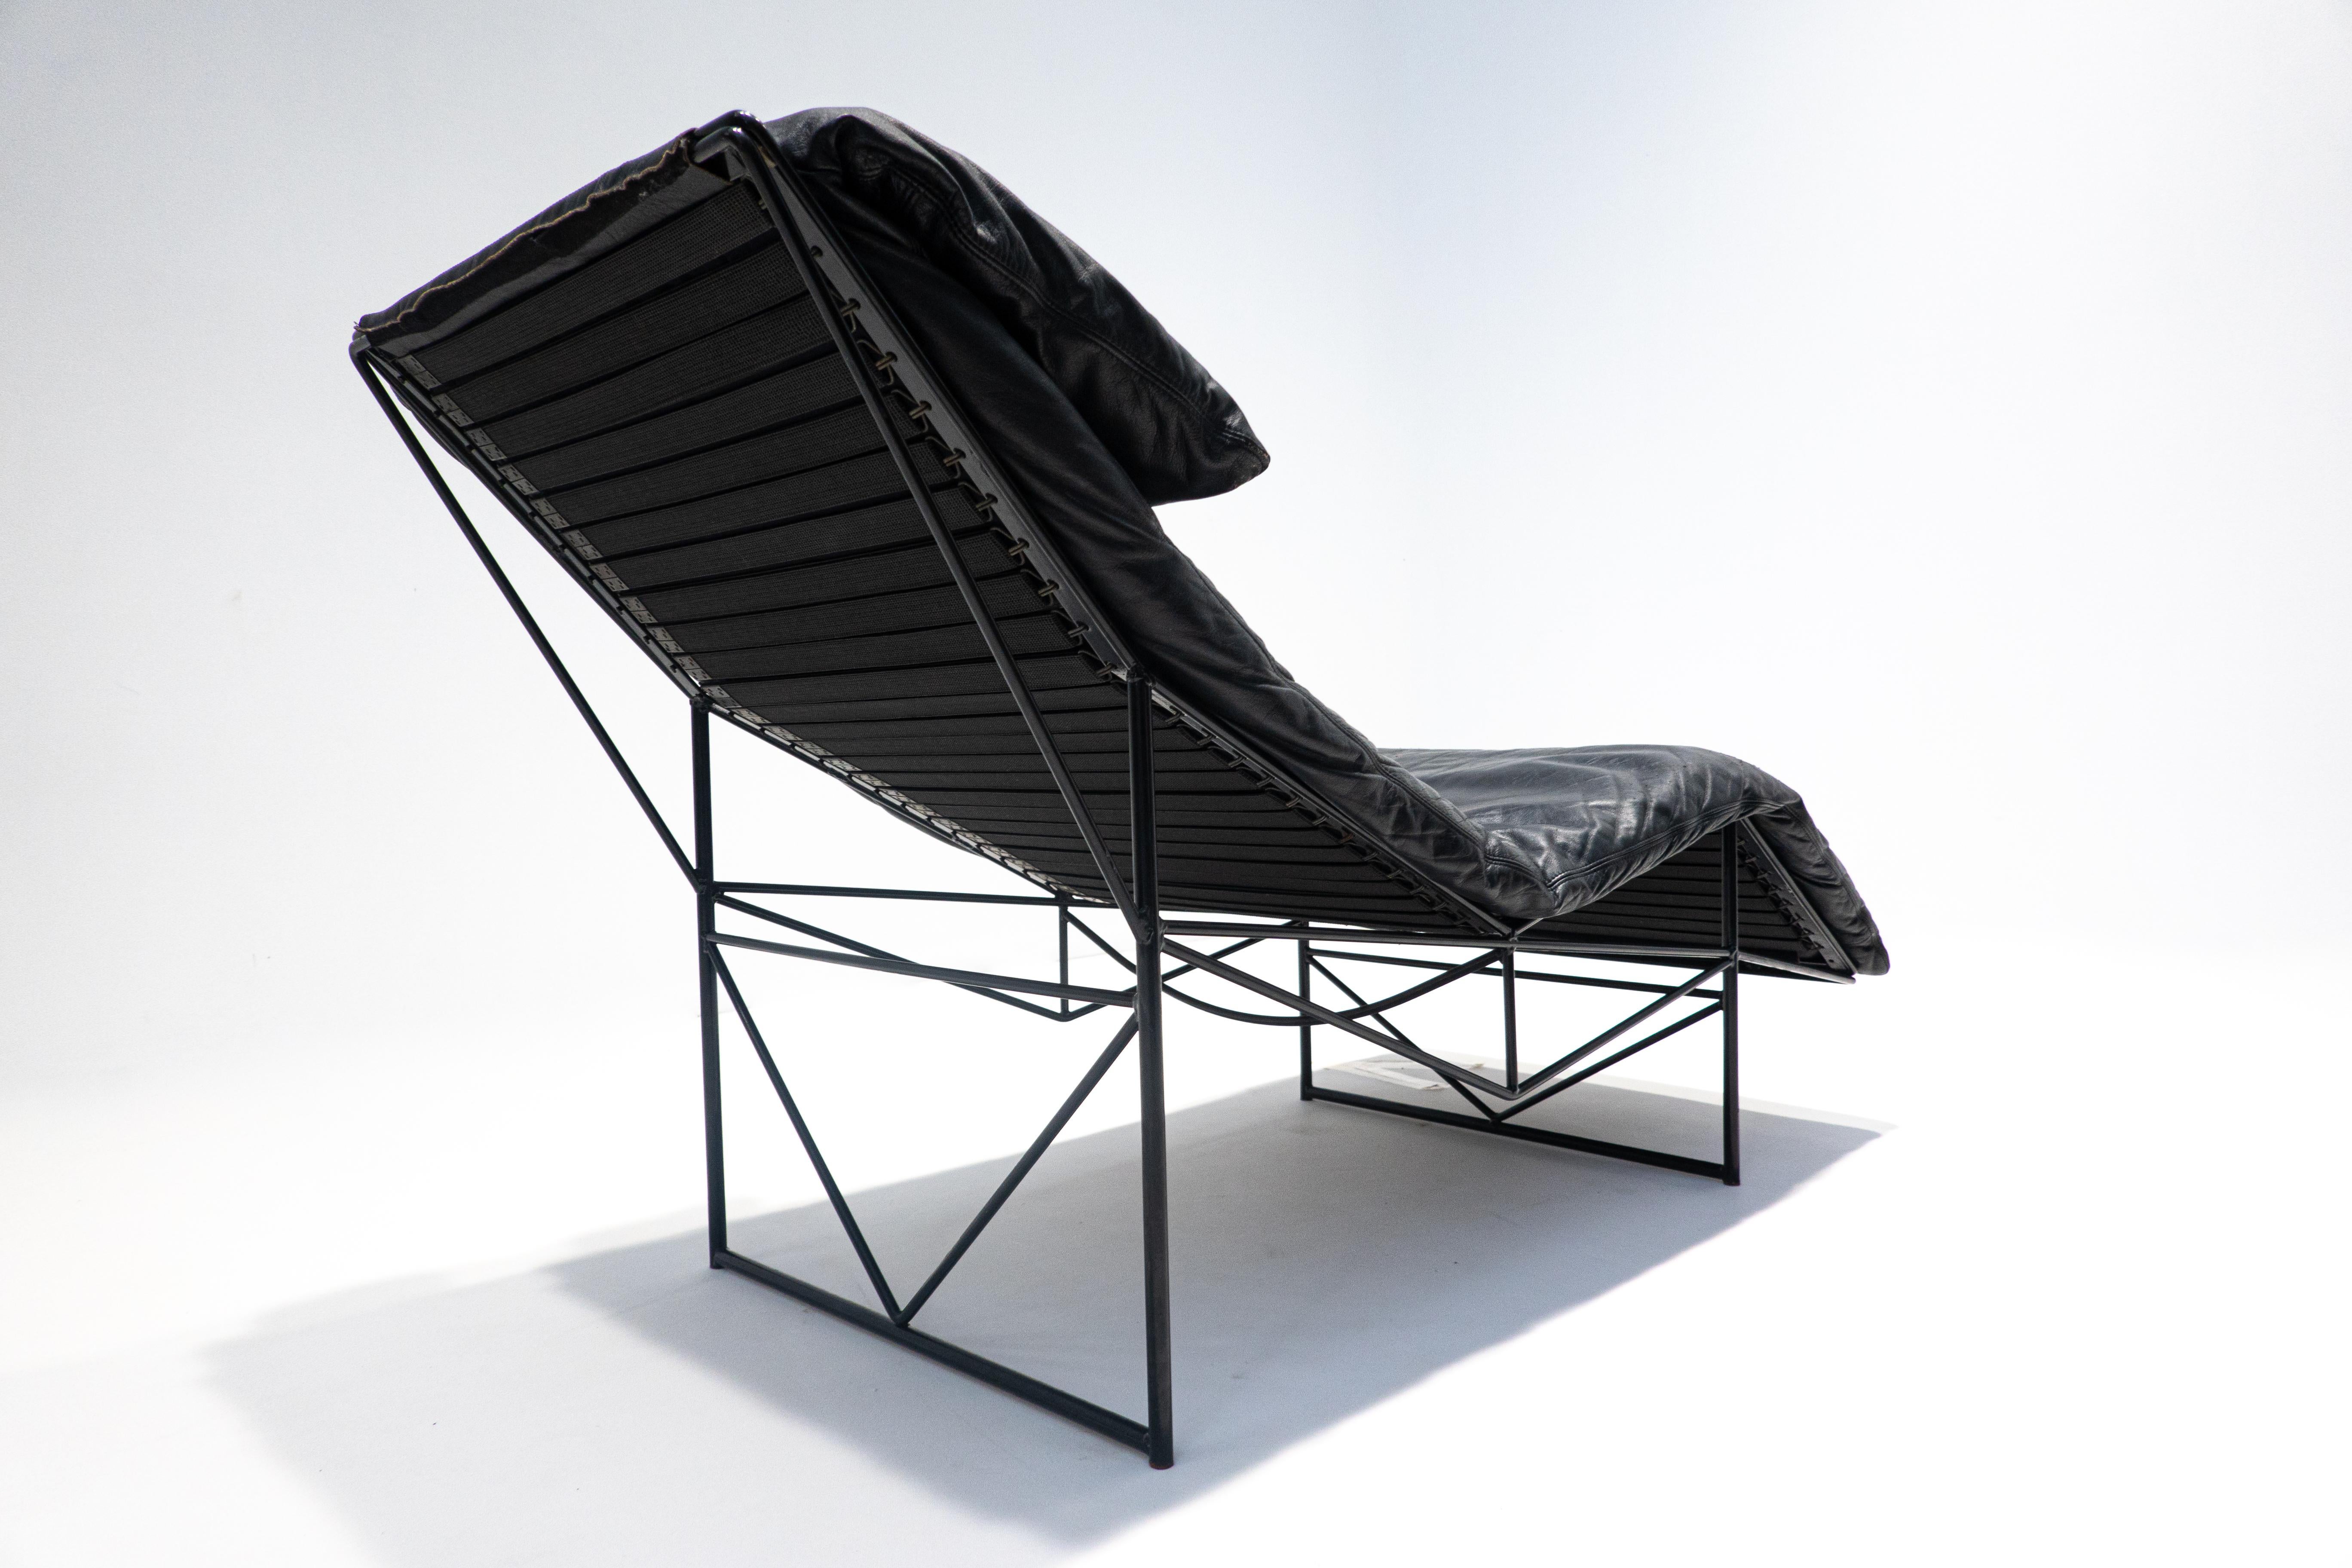 Lounge chair by Paolo Passerini for Uvet.